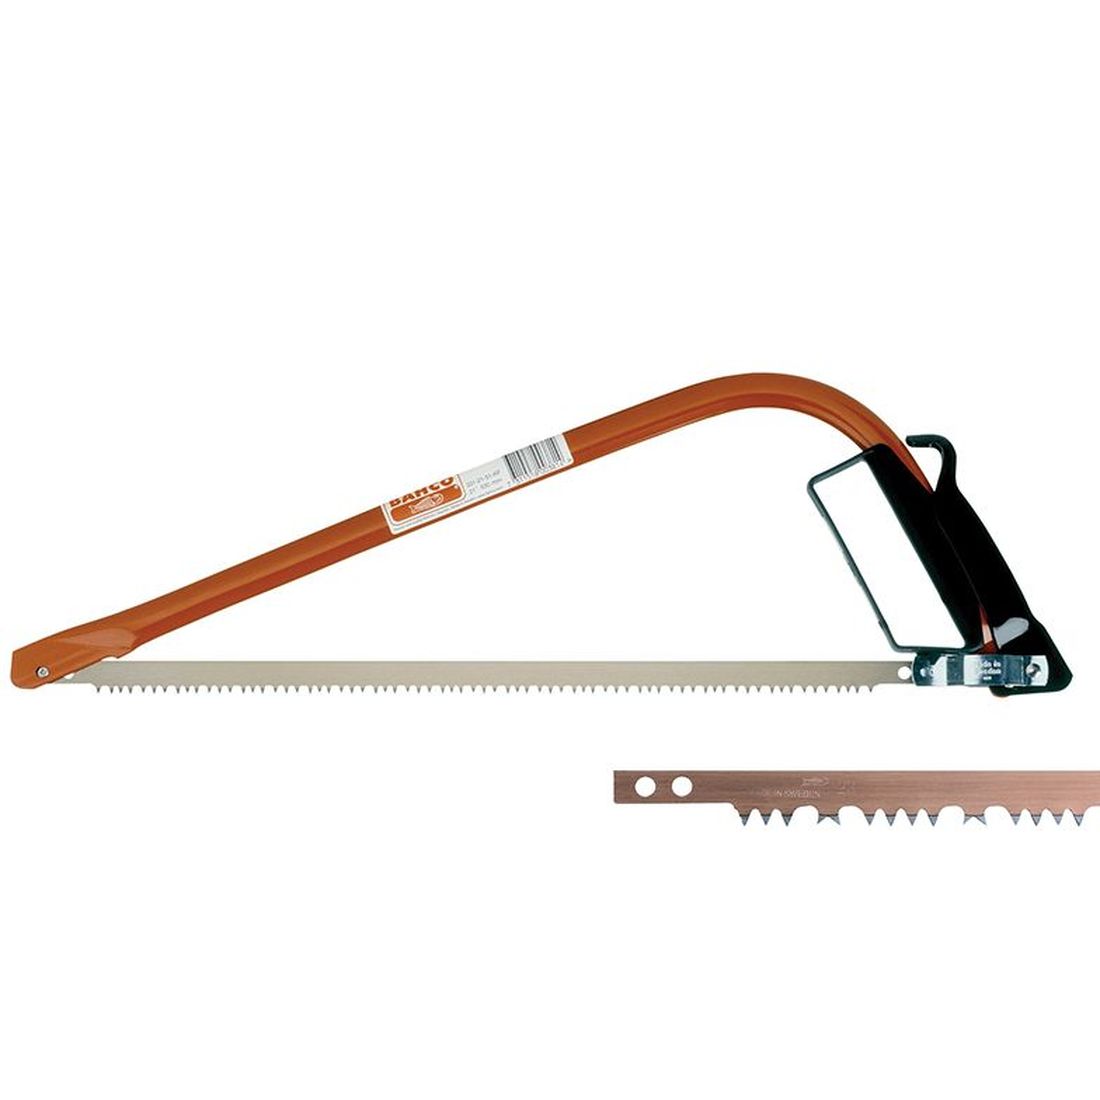 Bahco 331-21-51/23-21P Bowsaw 530mm (21in) with FREE 23/21 Green Wood Blade           